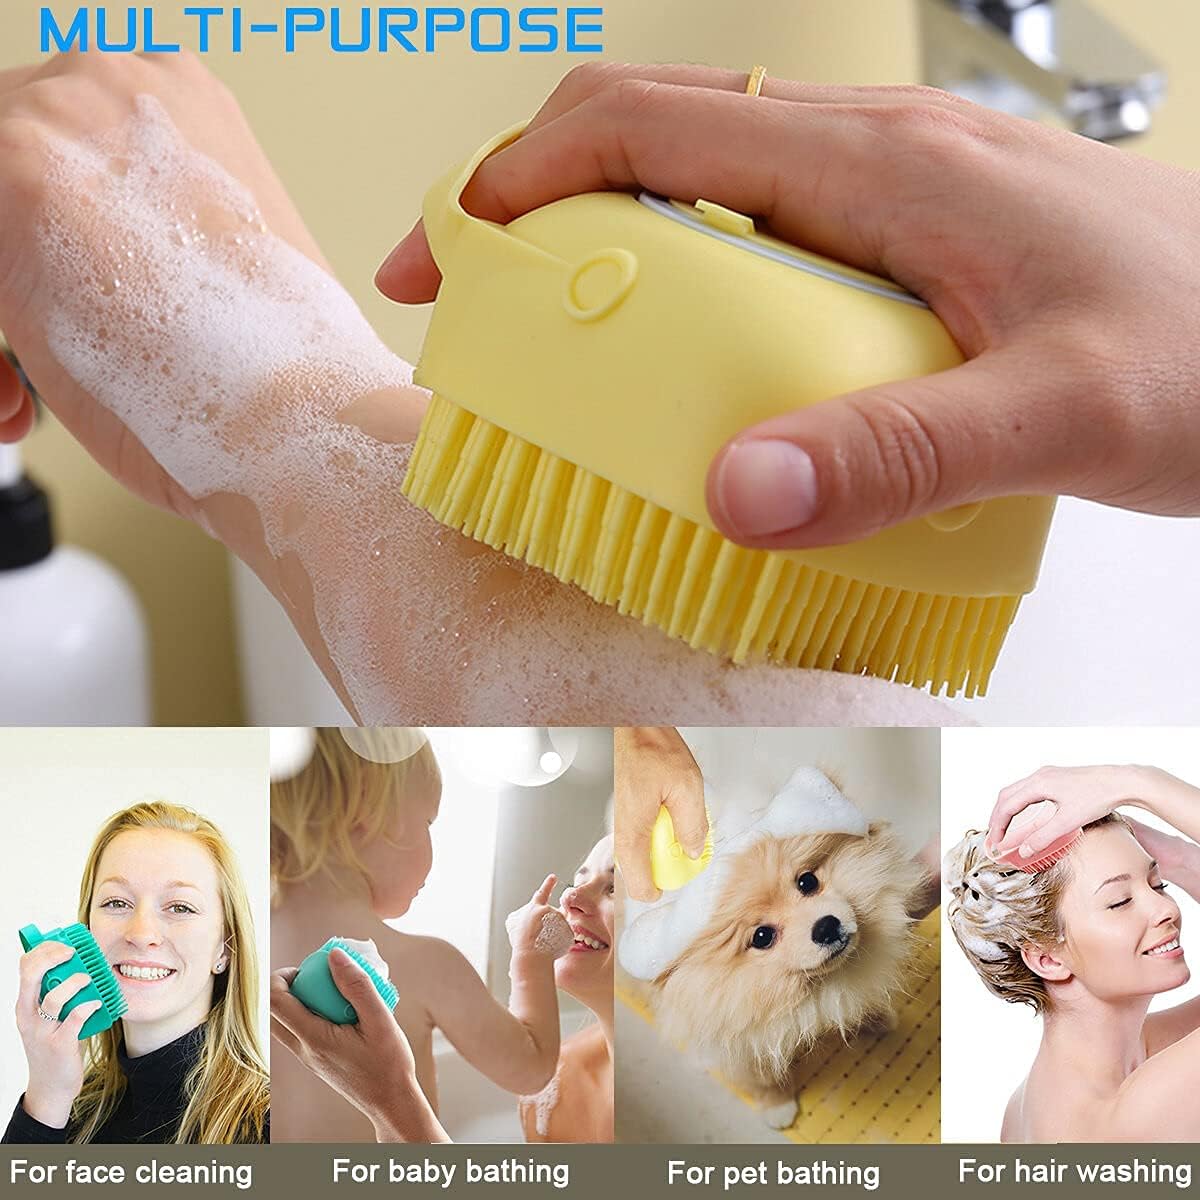 Silicon Massage Bath Brush Hair Scalp and Body Cleaner Liquid soap dispenser Silicone Loofah and Body Scrubber Brushes for Babies, Kids, Women, Men and Pets